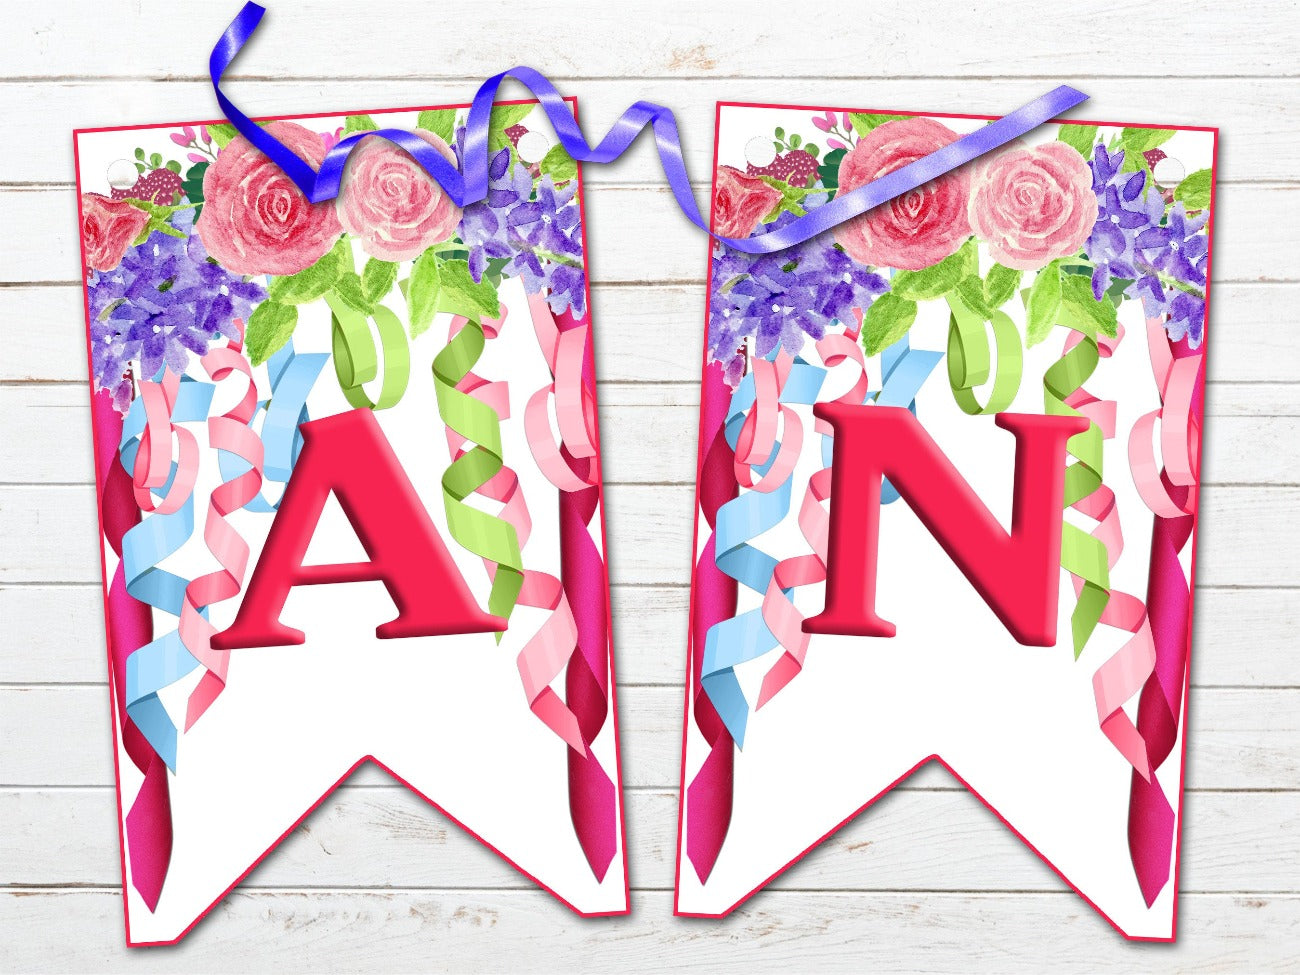 BELTANE BANNER, Pagan Altar Garland Decoration, A & N, each flag has pastel ribbons and flowers in colors of pink, mauve, green and blueoon a white background - Morgana Magick Spell